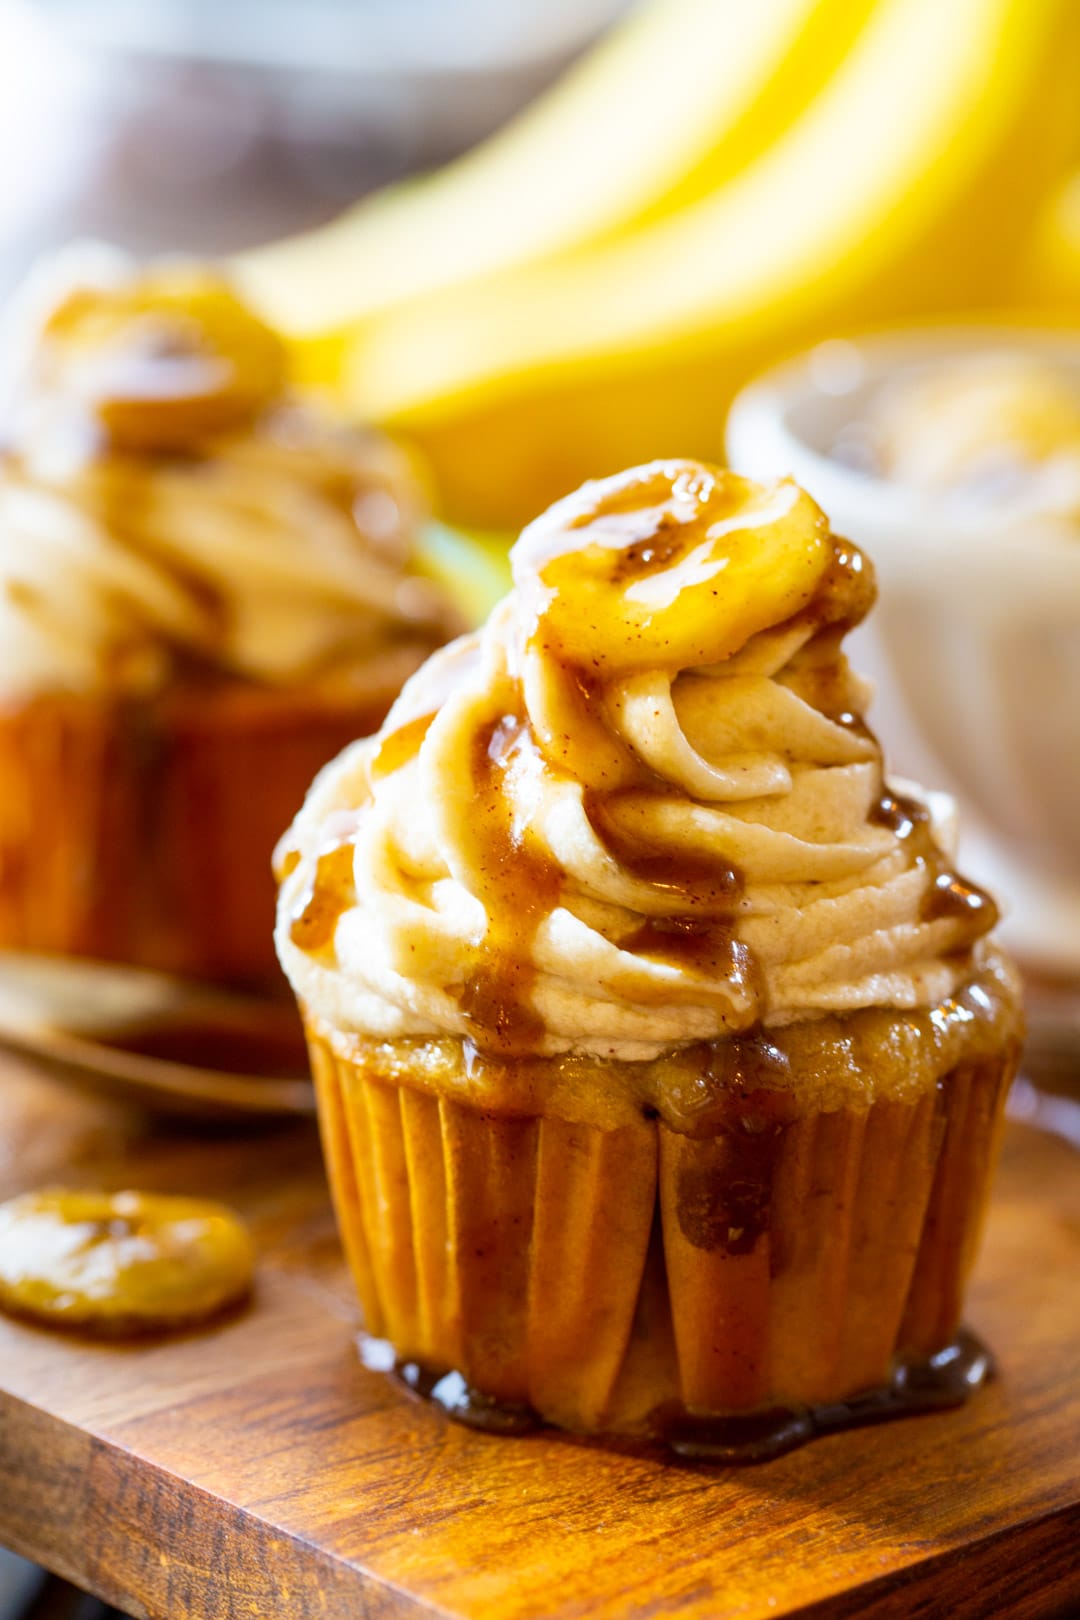 Bananas Foster Cupcakes with praline sauce dripping down.